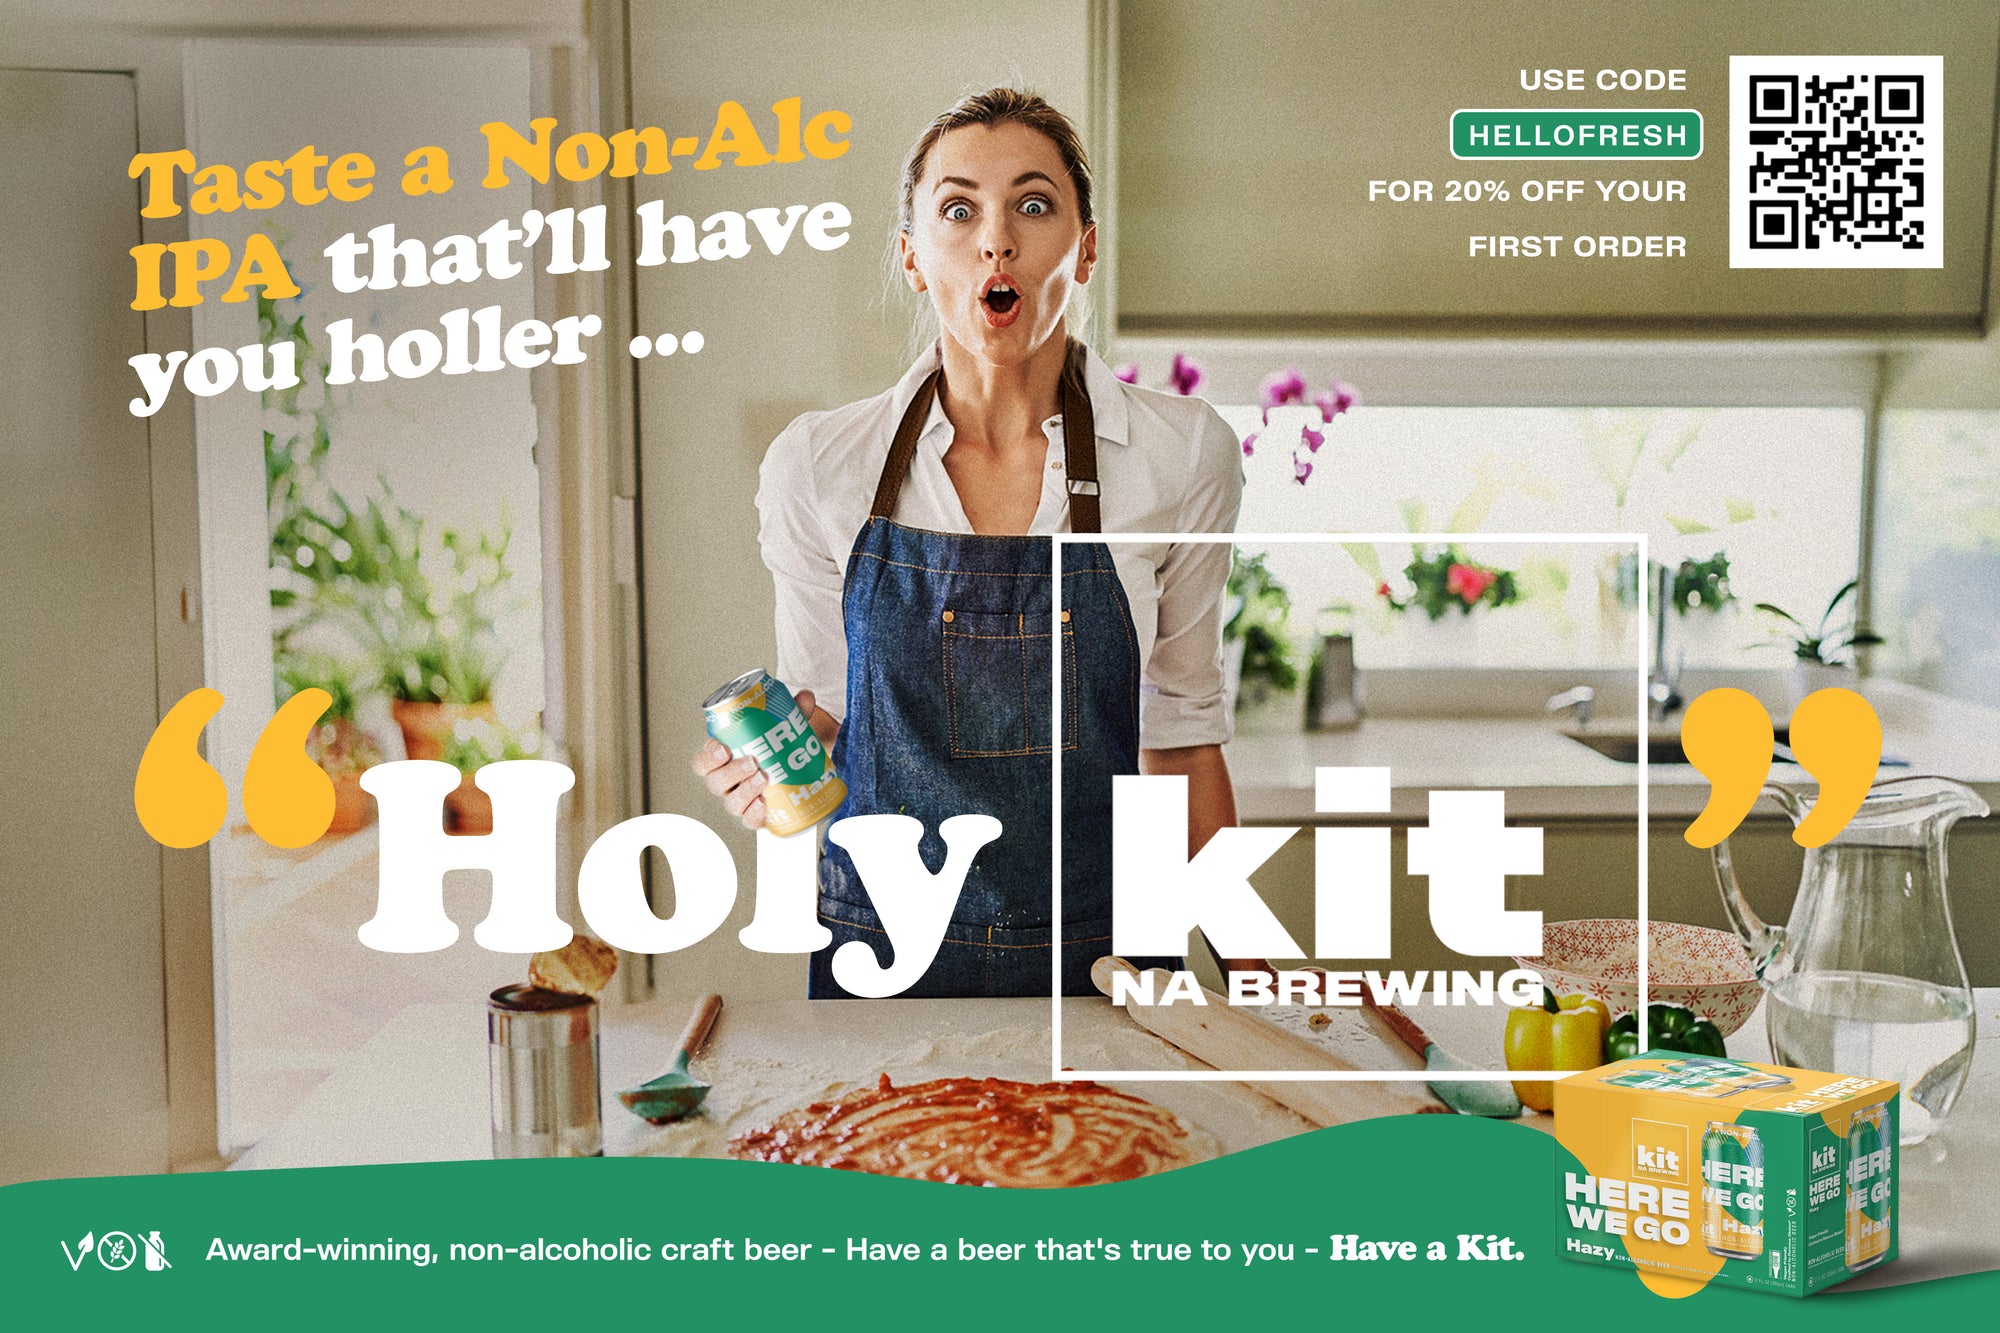 Kit NA Brewing Partners with HelloFresh for Delicious Deliveries